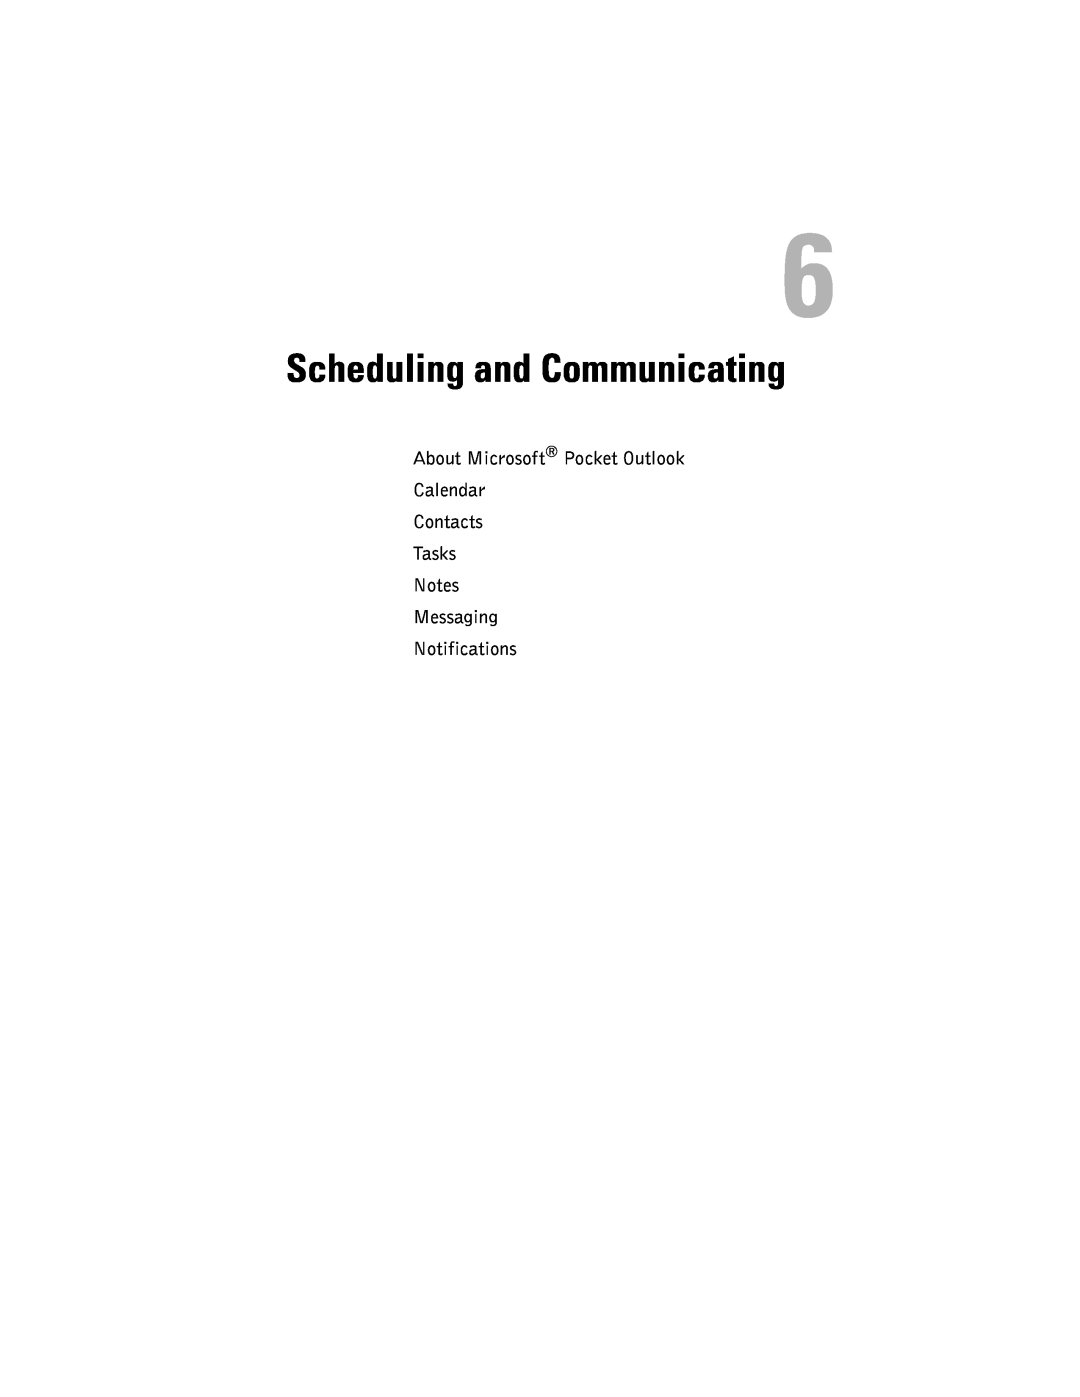 Dell HC02U-W Scheduling and Communicating, About Microsoft Pocket Outlook Calendar Contacts Tasks, Messaging Notifications 